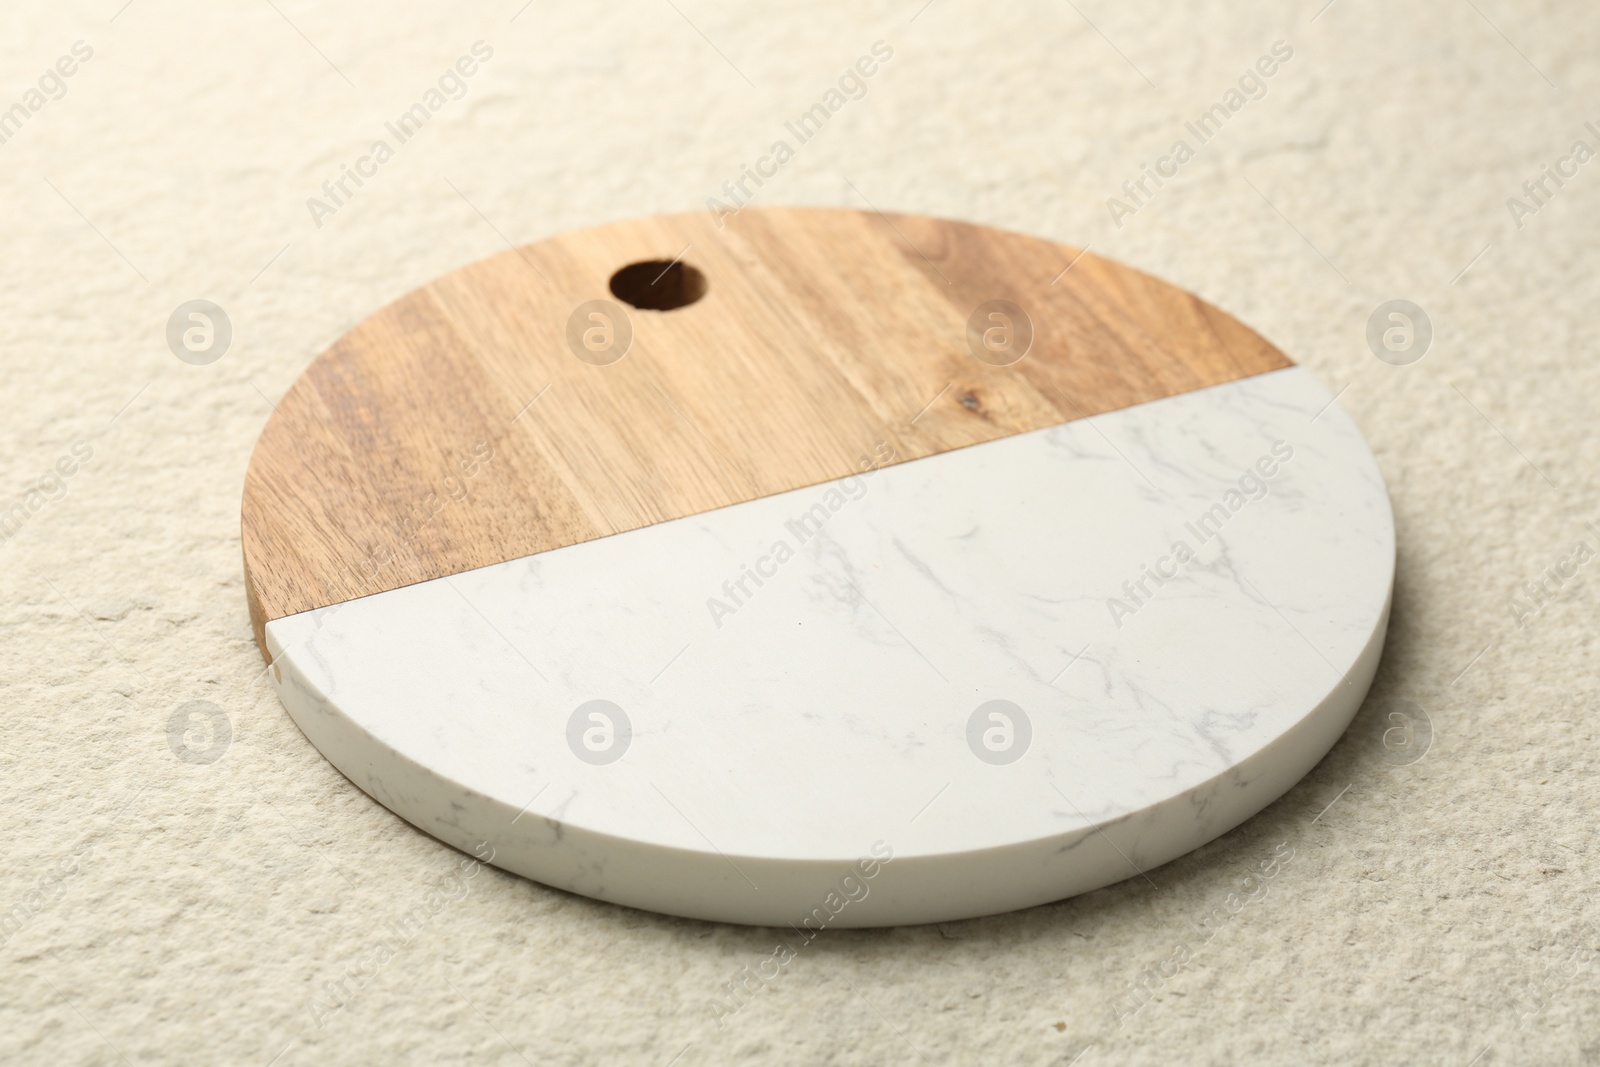 Photo of One serving board on beige table, closeup